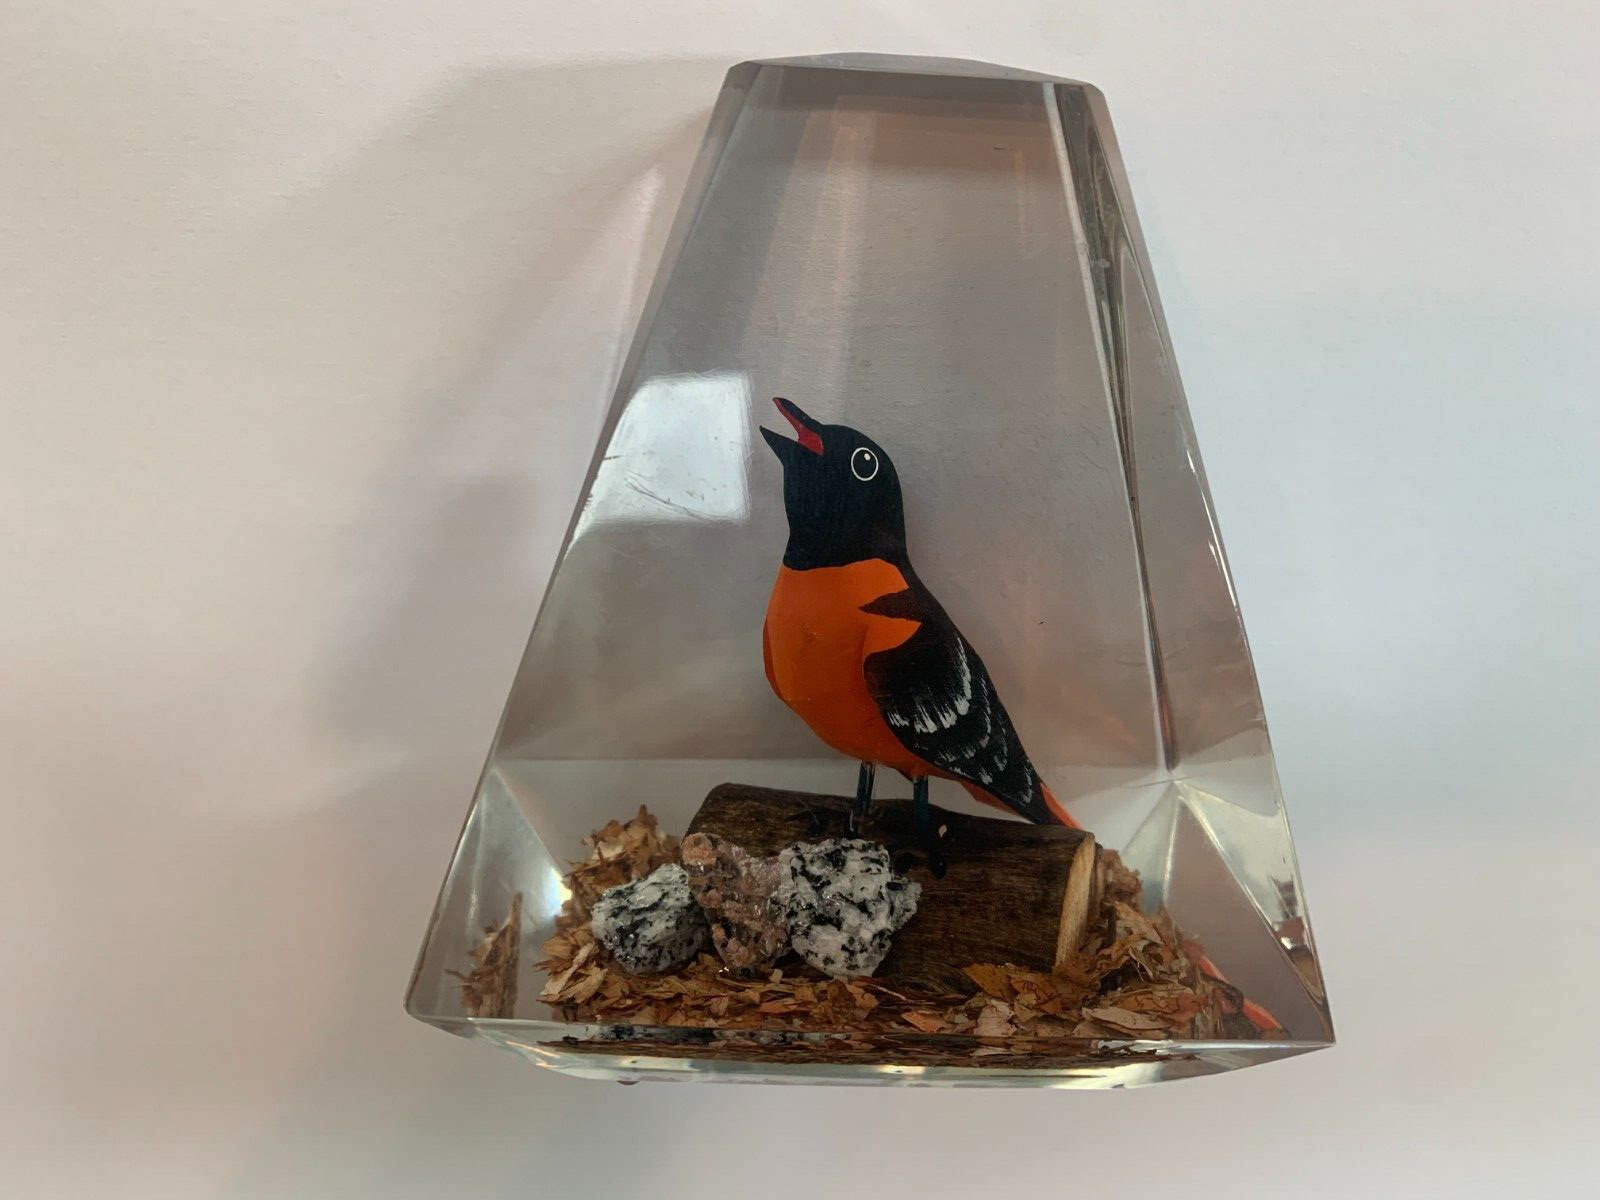 Triangle Paperweight with Baltimore Oriole bird inside - Good condition - Rare